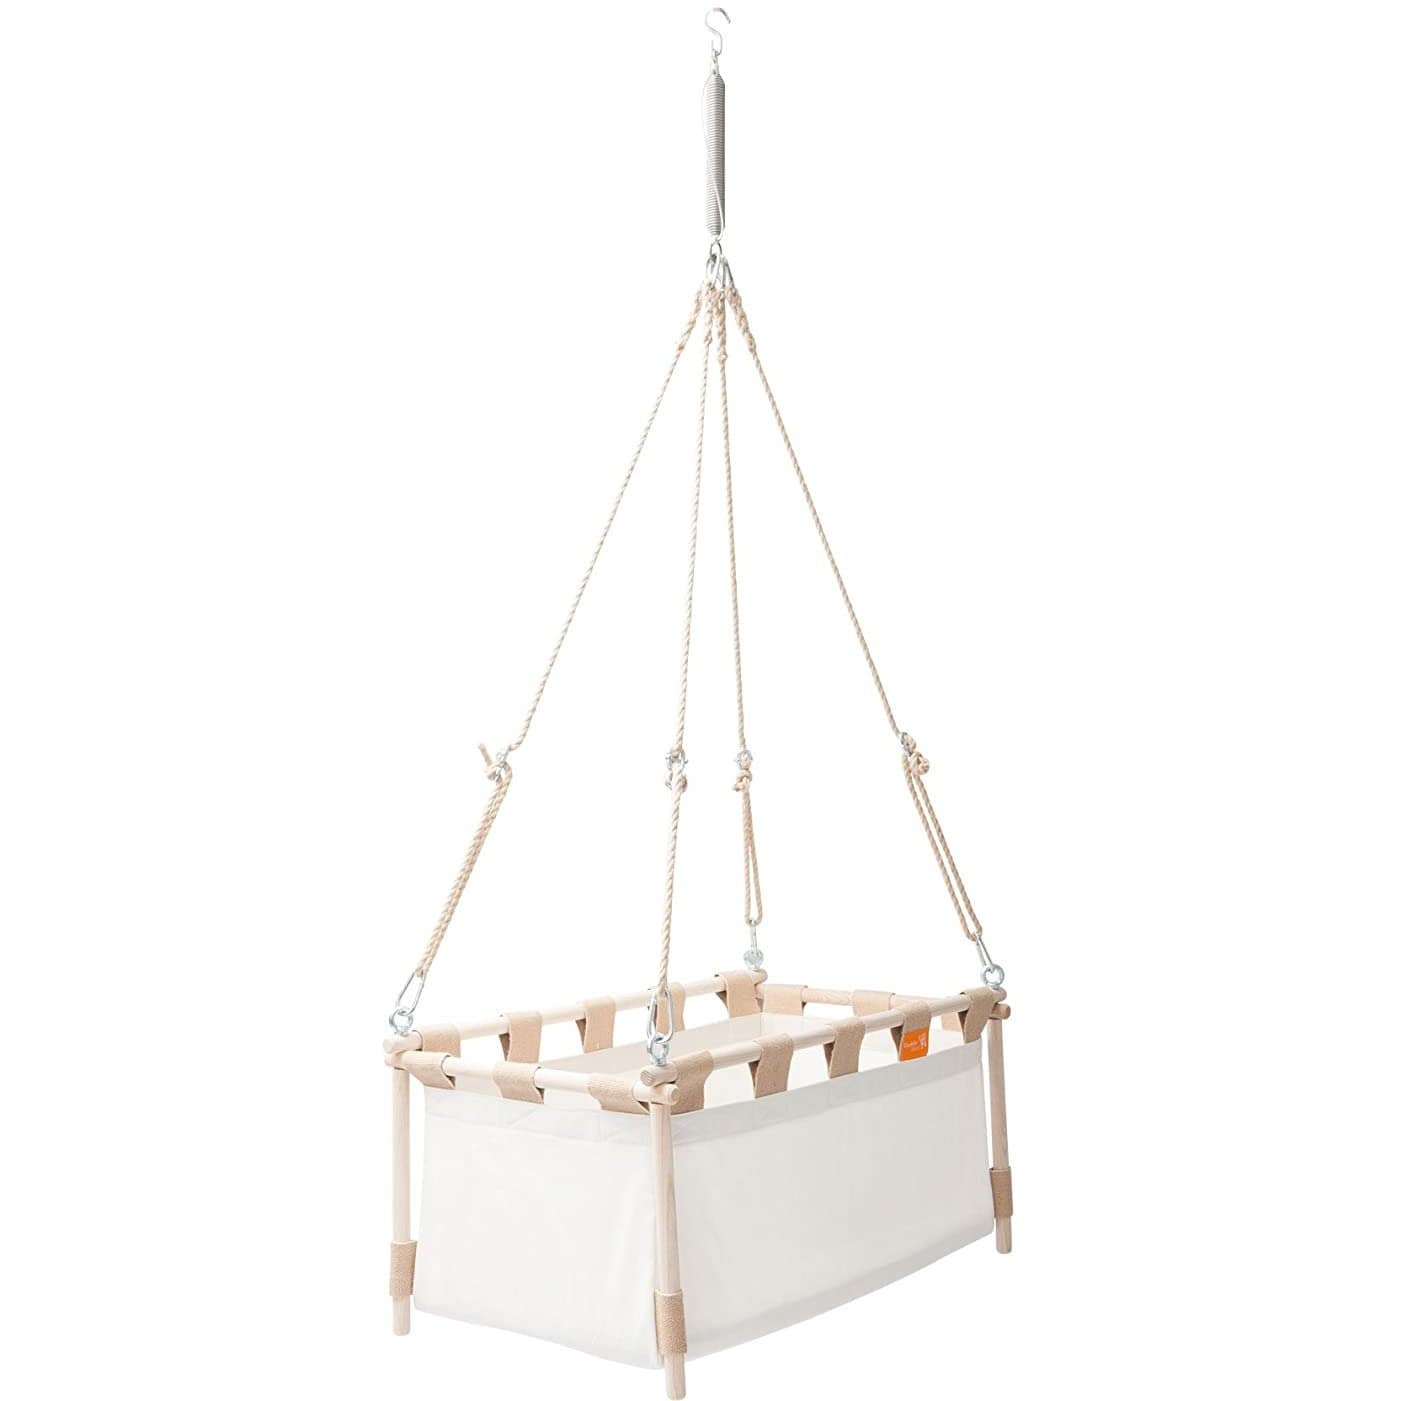 Hanging Cradles, baby cribs, bassinets and beds by Hussh-Cradles